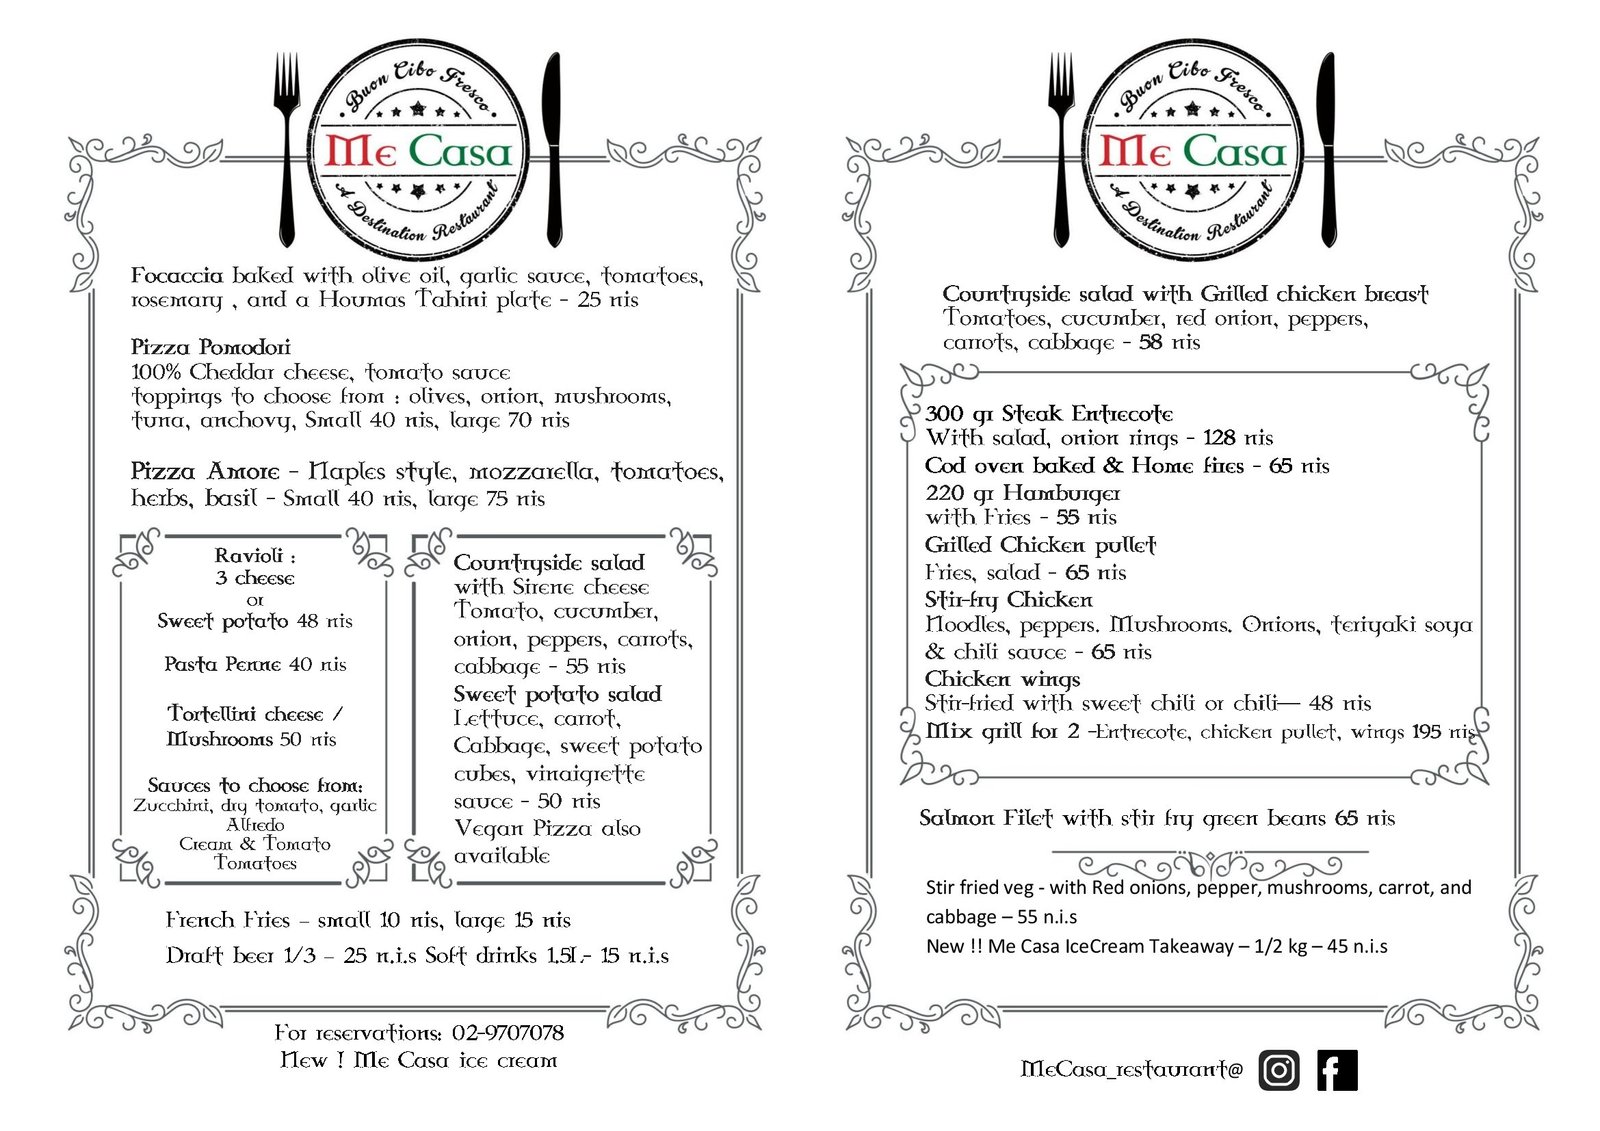 View our menu in English